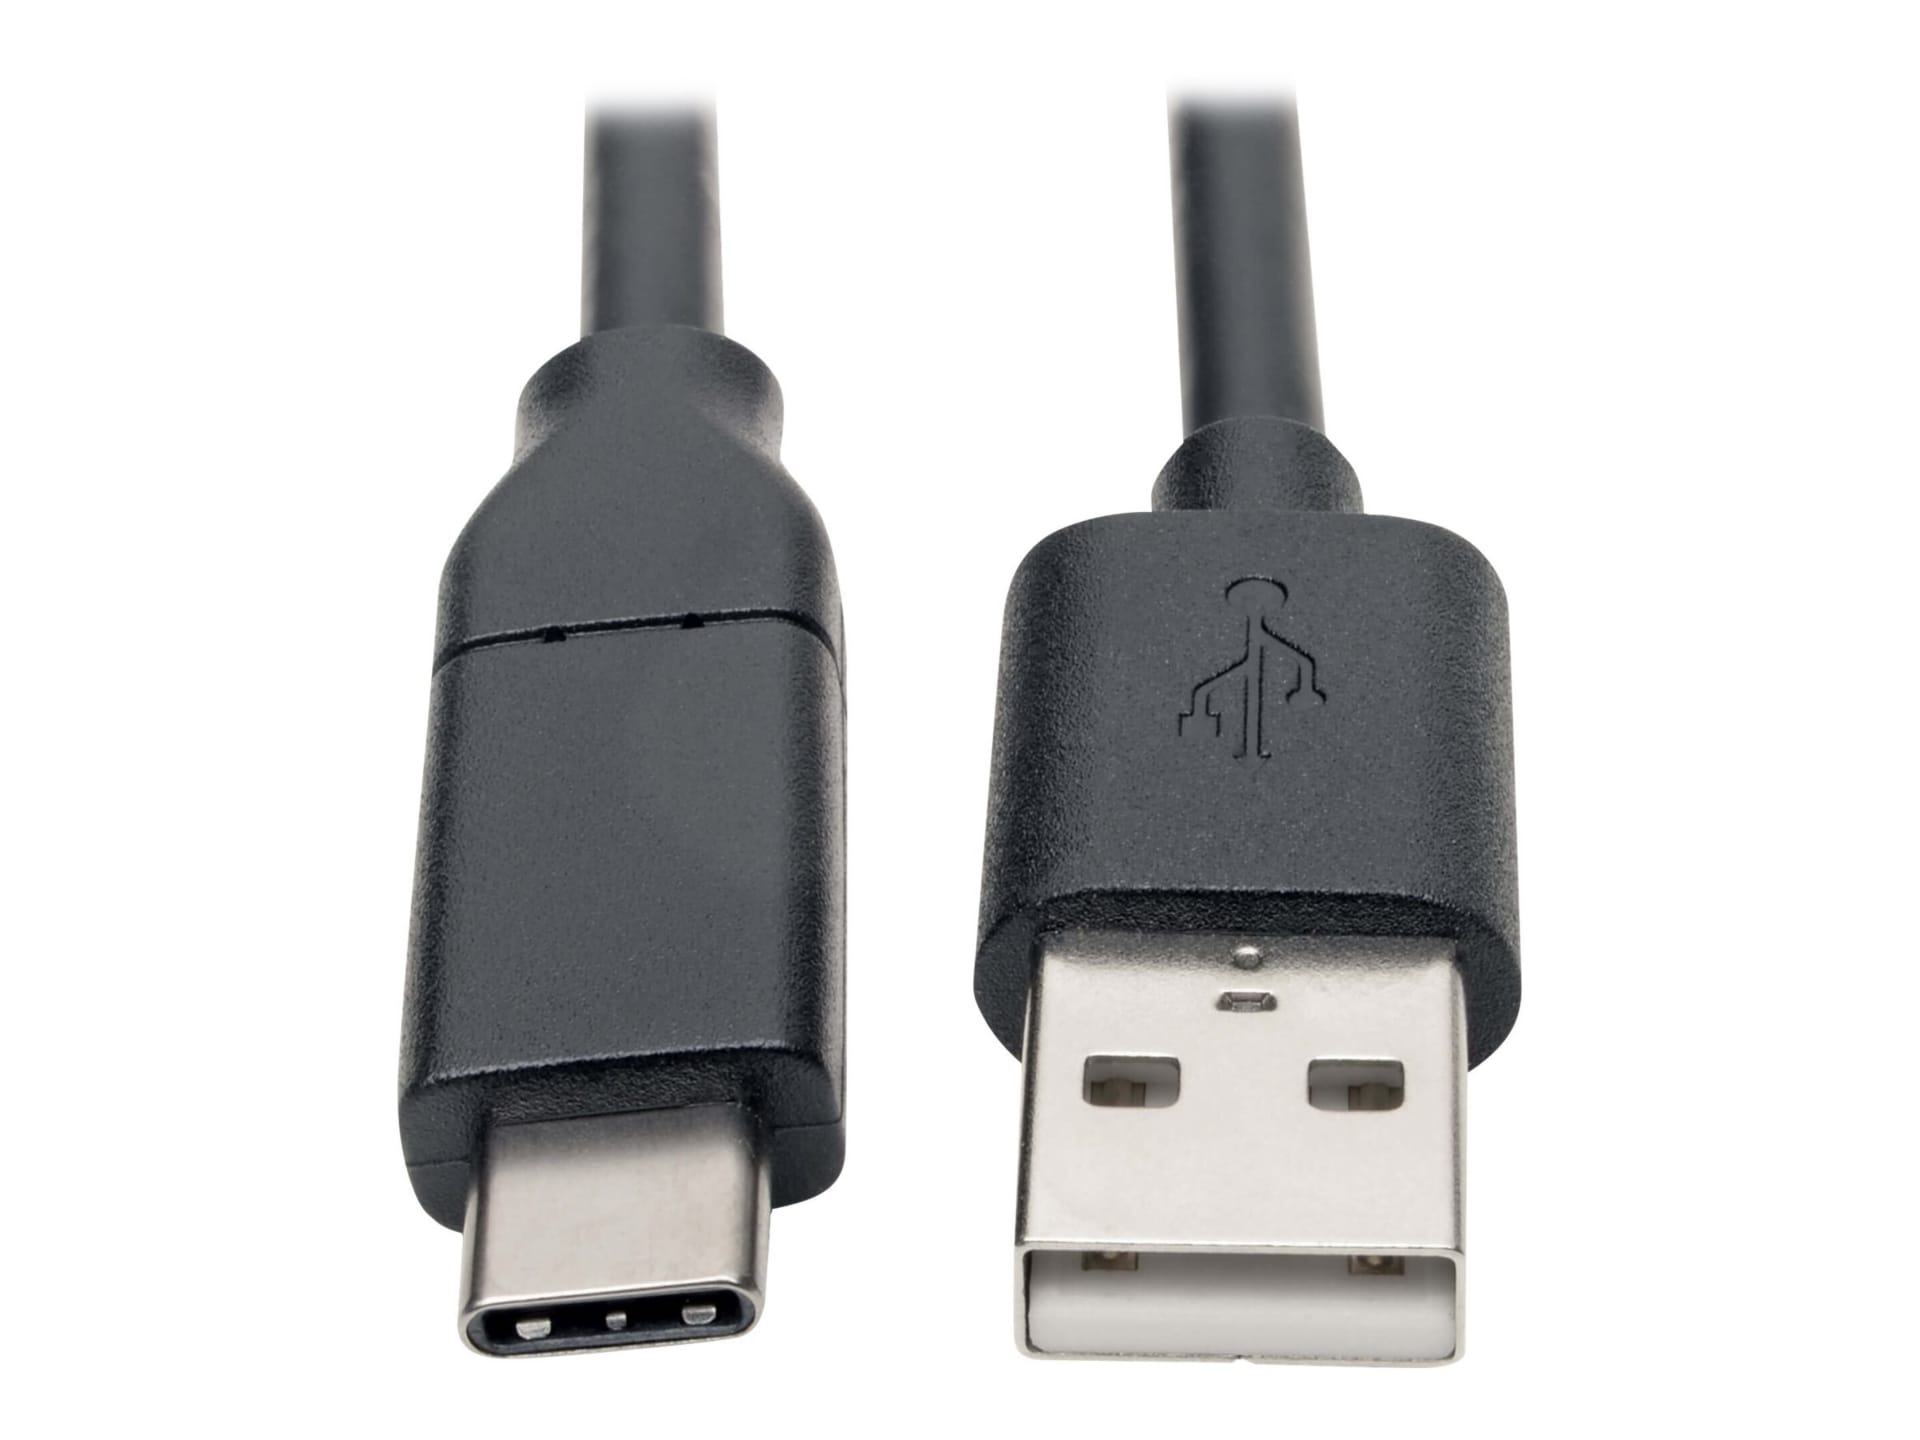 Eaton Tripp Lite Series USB-A to USB-C Cable, USB 2.0, 3A Rating, USB-IF Ce